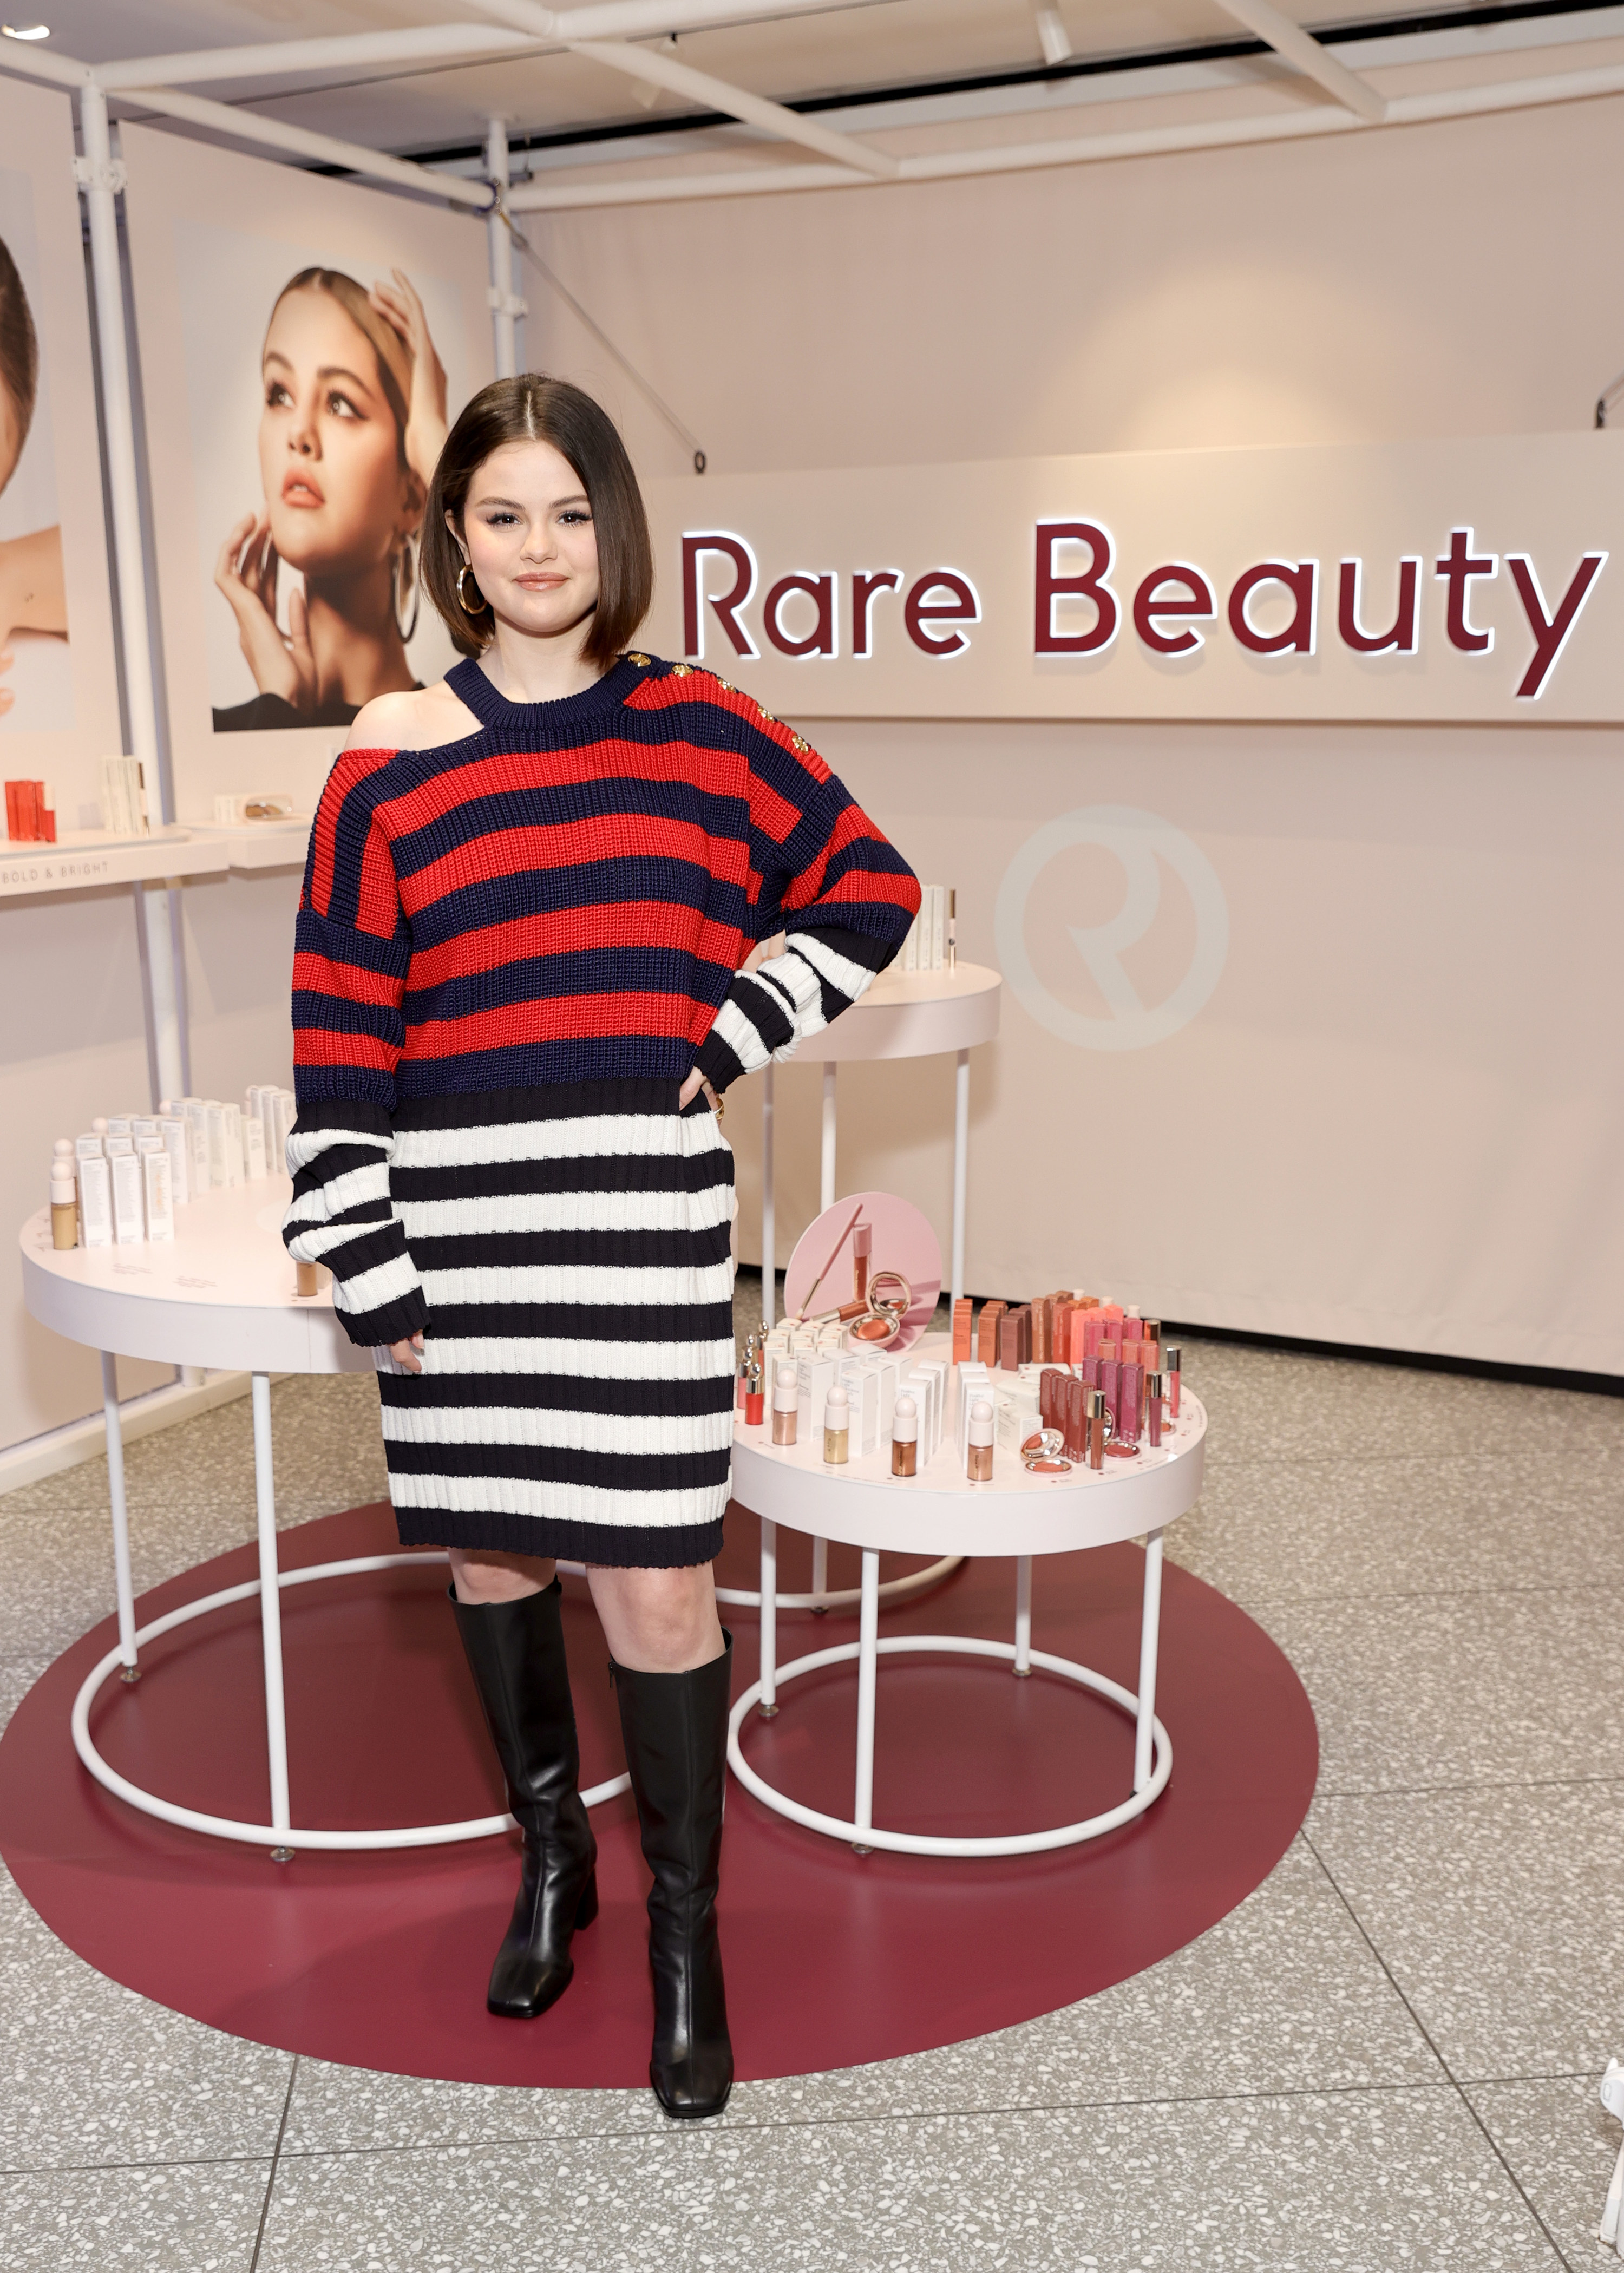 Selena stands in front of a display for her cosmetics brand Rare Beauty